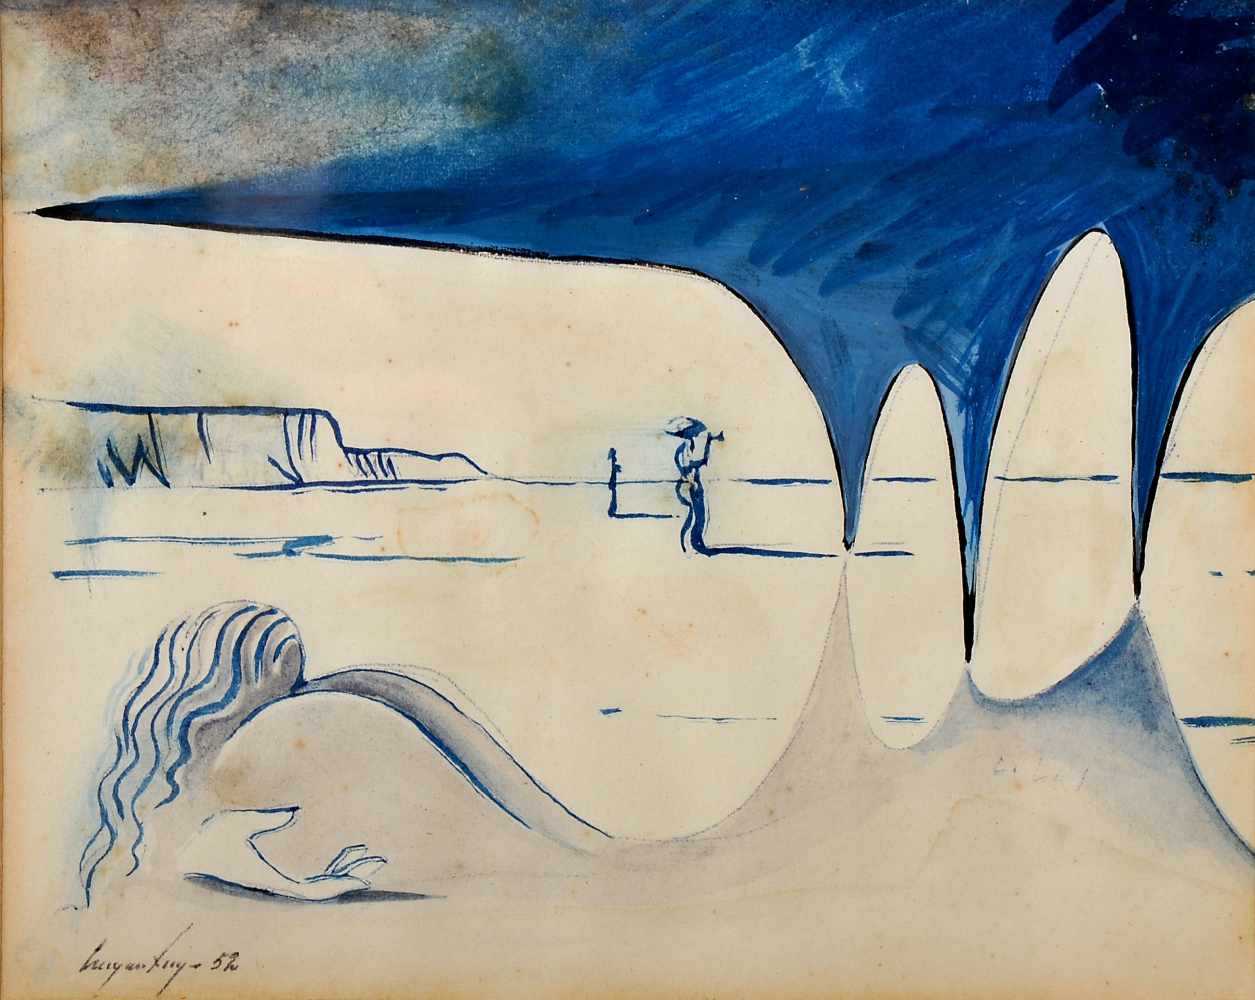 CRUZEIRO SEIXAS - NASC. 1920, Untitled, mixed technique on paper, signed and dated 1955, Dim. - 14 x